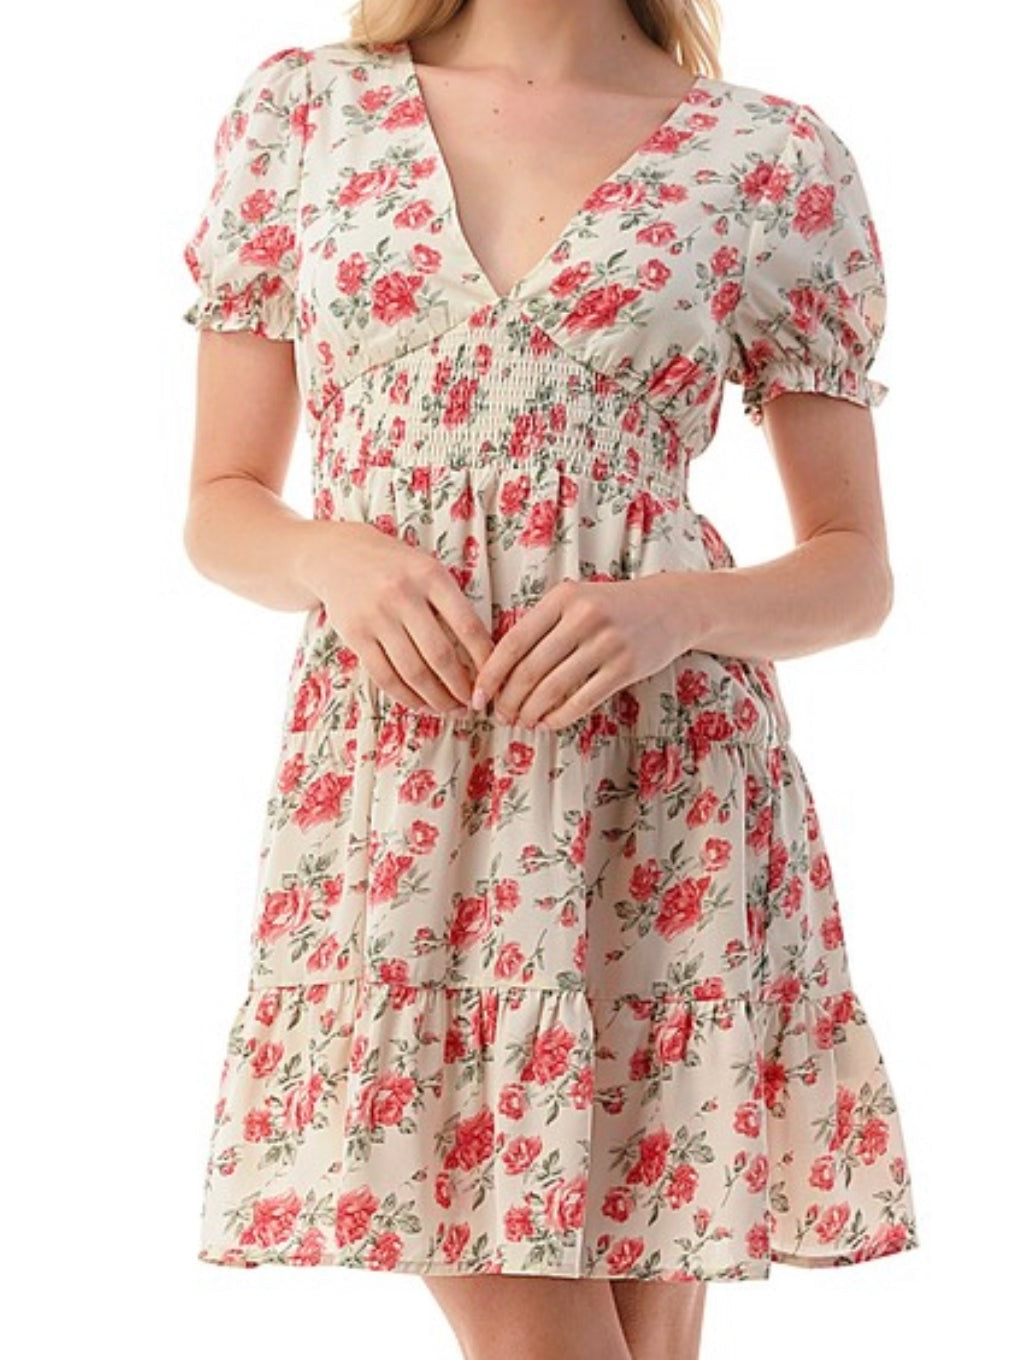 Jessie Floral Print Dress with Cut Out Back